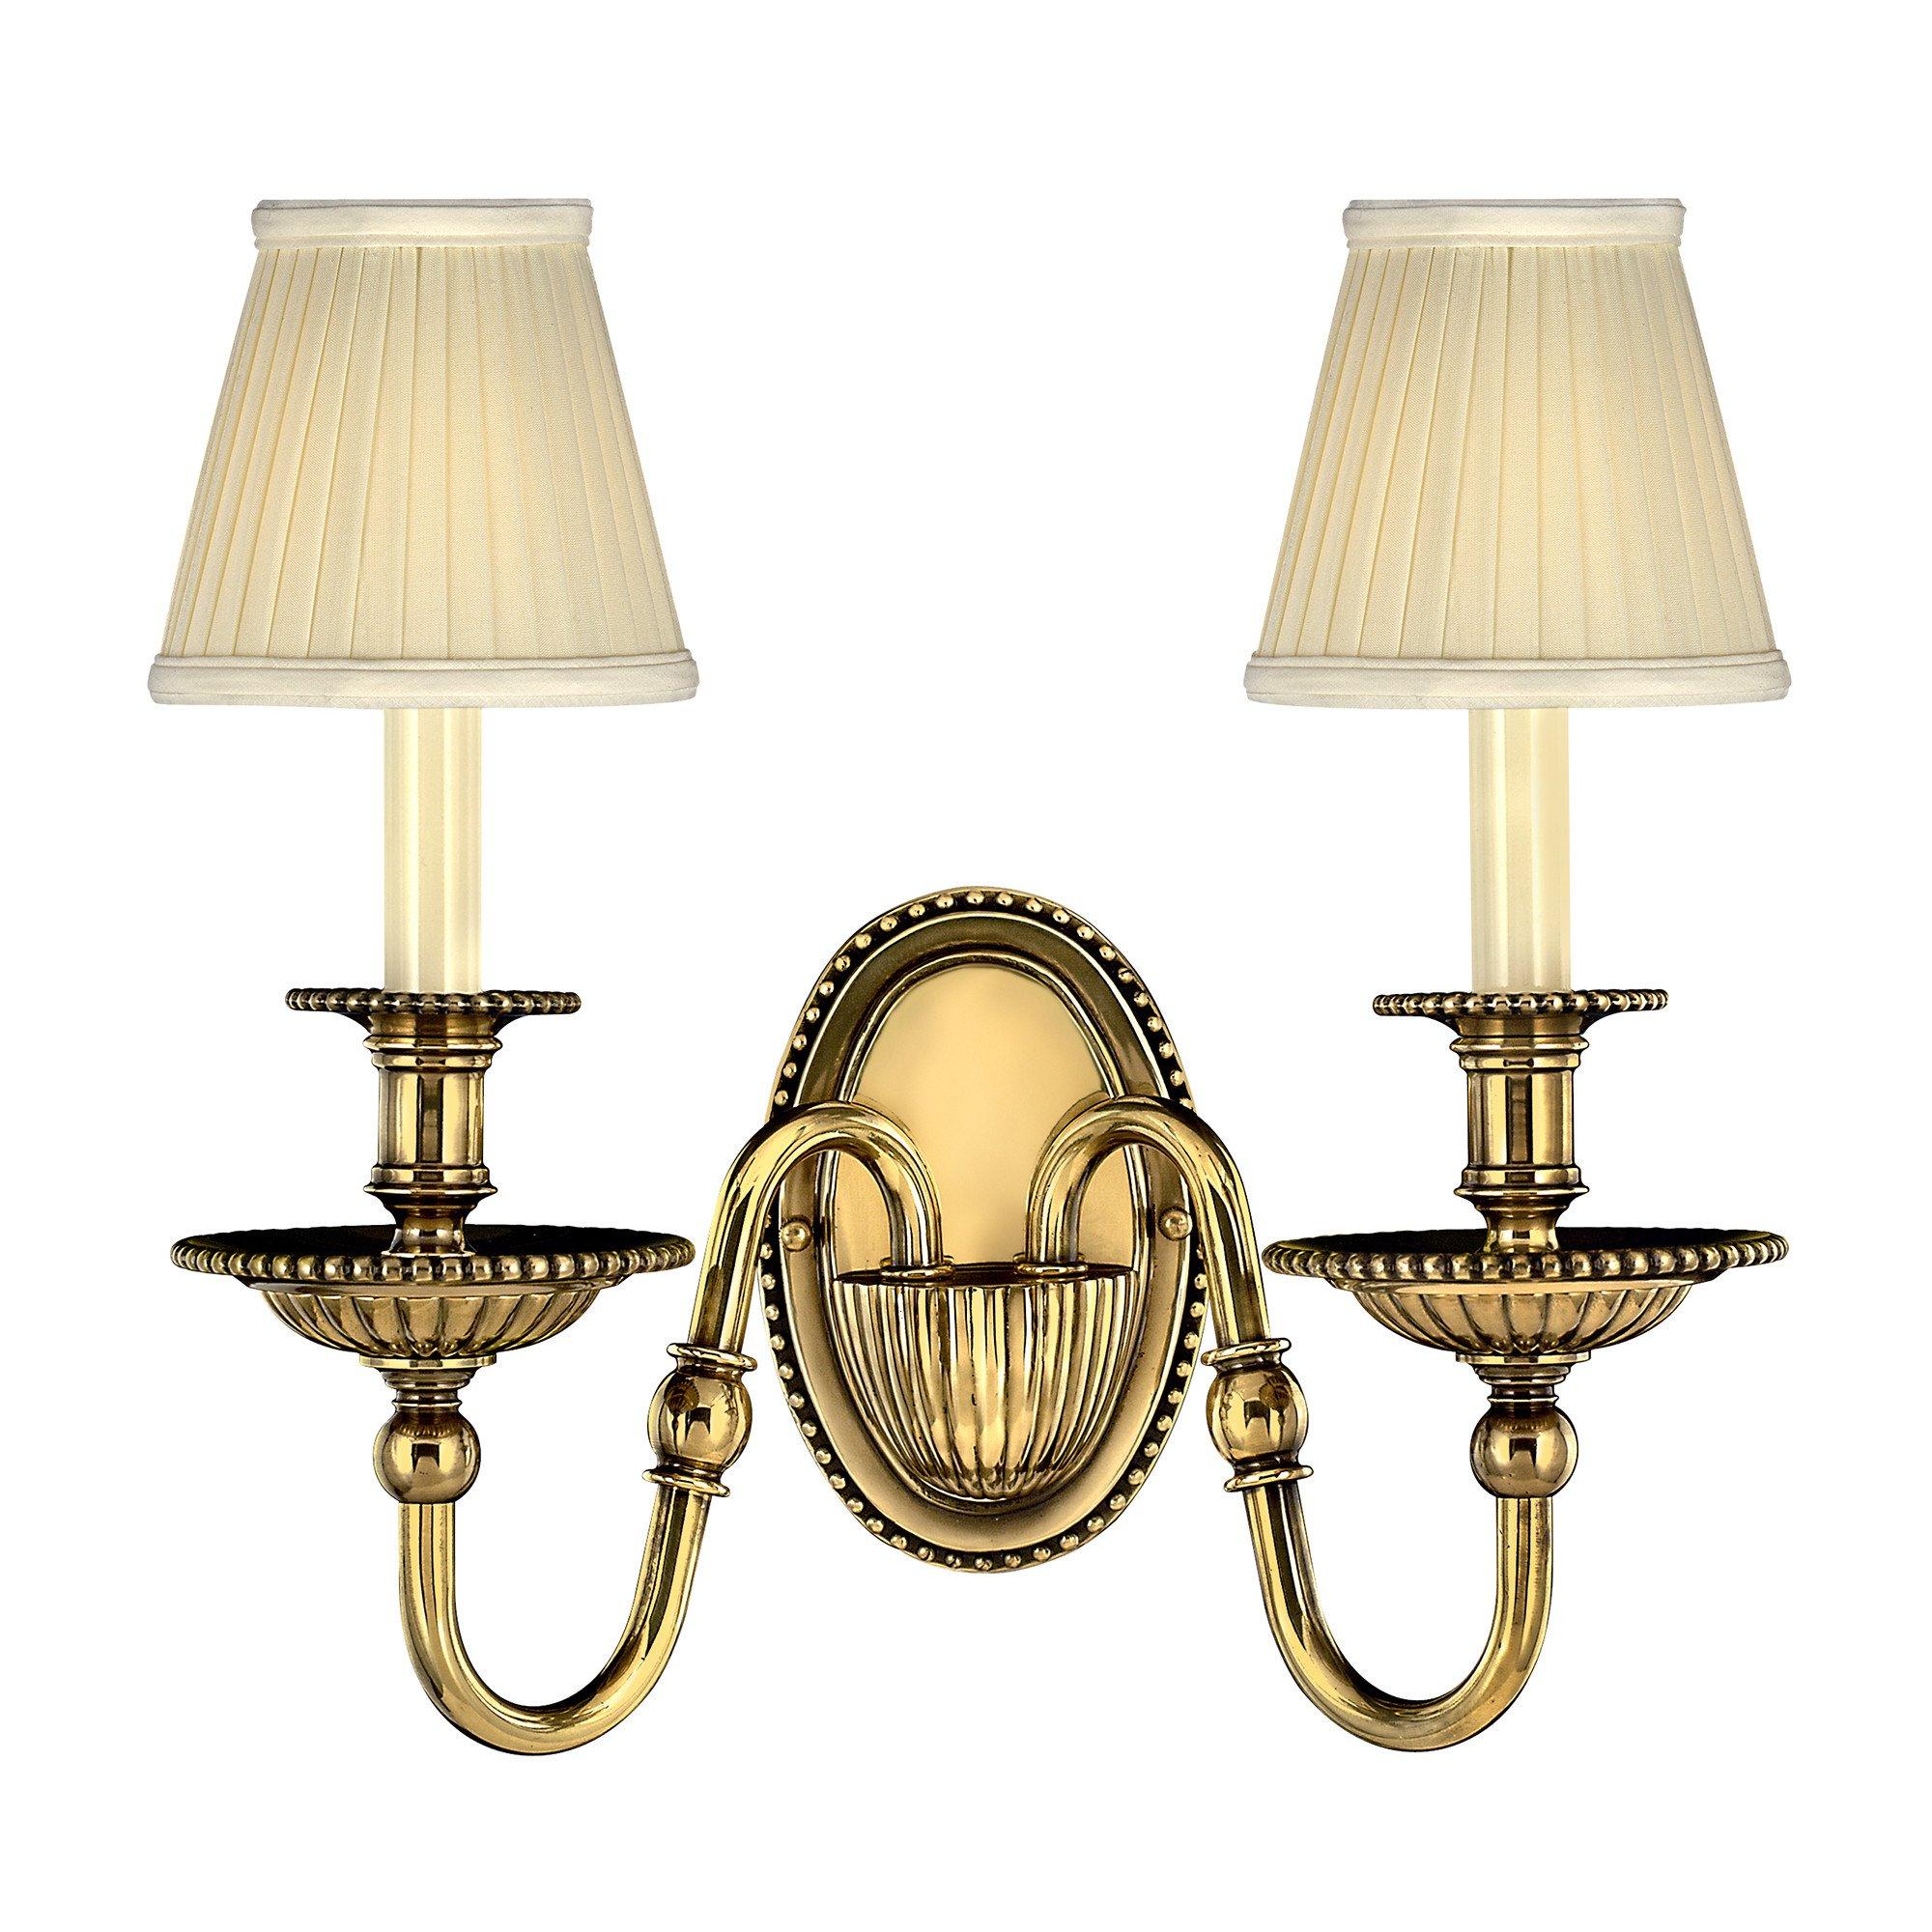 Cambridge 2 Light Indoor Candle Wall Light Burnished Brass (Shades Sold Separately) E14